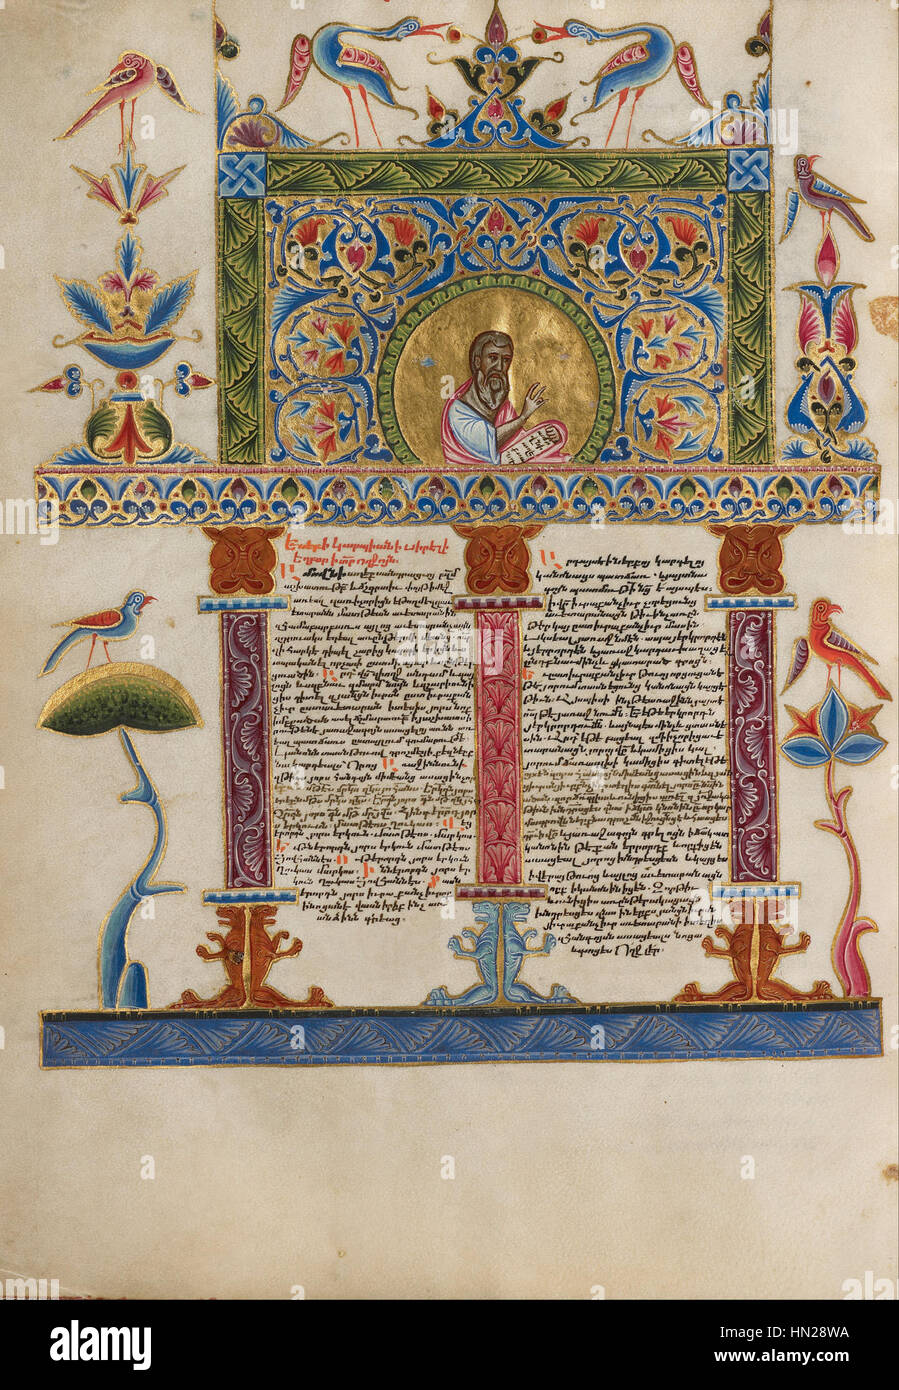 Malnazar - Decorated Incipit Page - Google Art Project Stock Photo